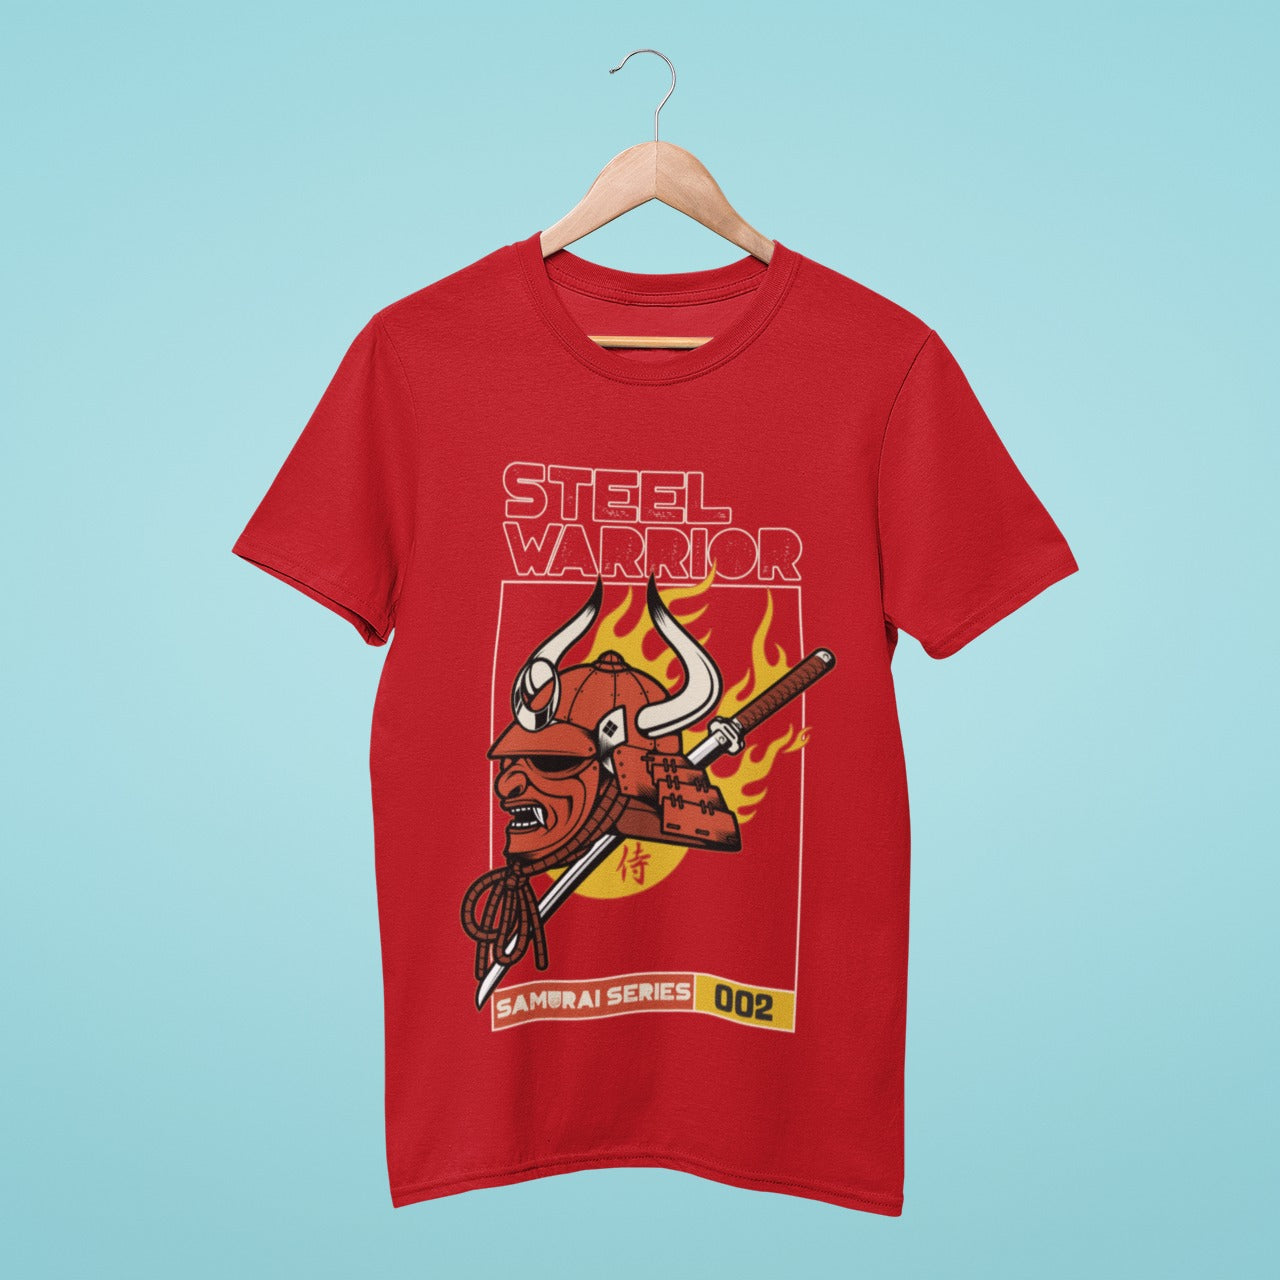 Unleash your inner warrior with this red t-shirt featuring a burning samurai helmet in side profile and the title "Steel Warrior". Perfect for gamers who love to channel their fighting spirit in their gaming.